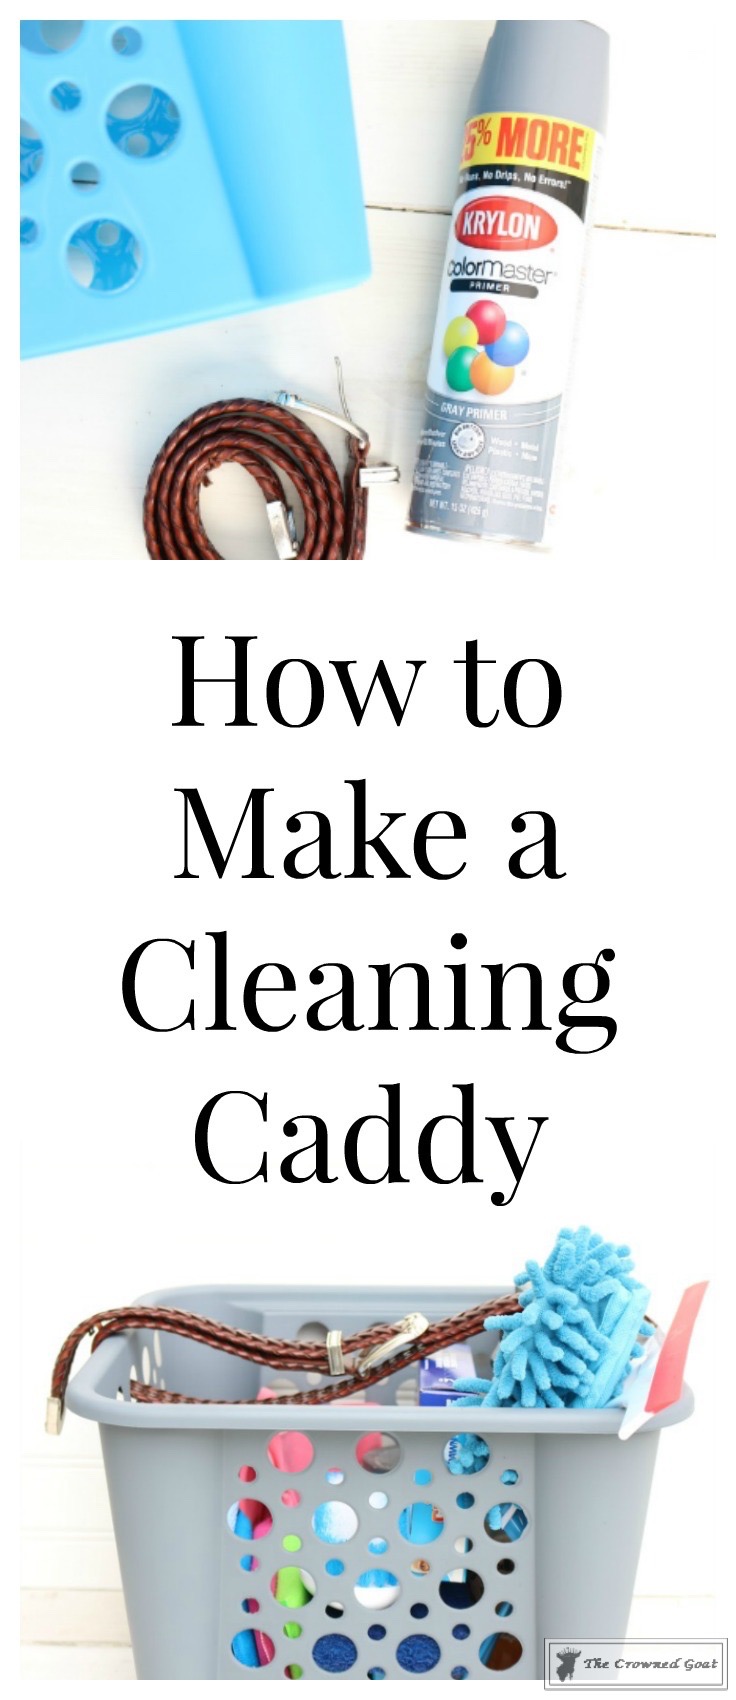 https://thecrownedgoat.com/create-budget-friendly-cleaning-caddy/diy-cleaning-caddy-the-crowned-goat-1/